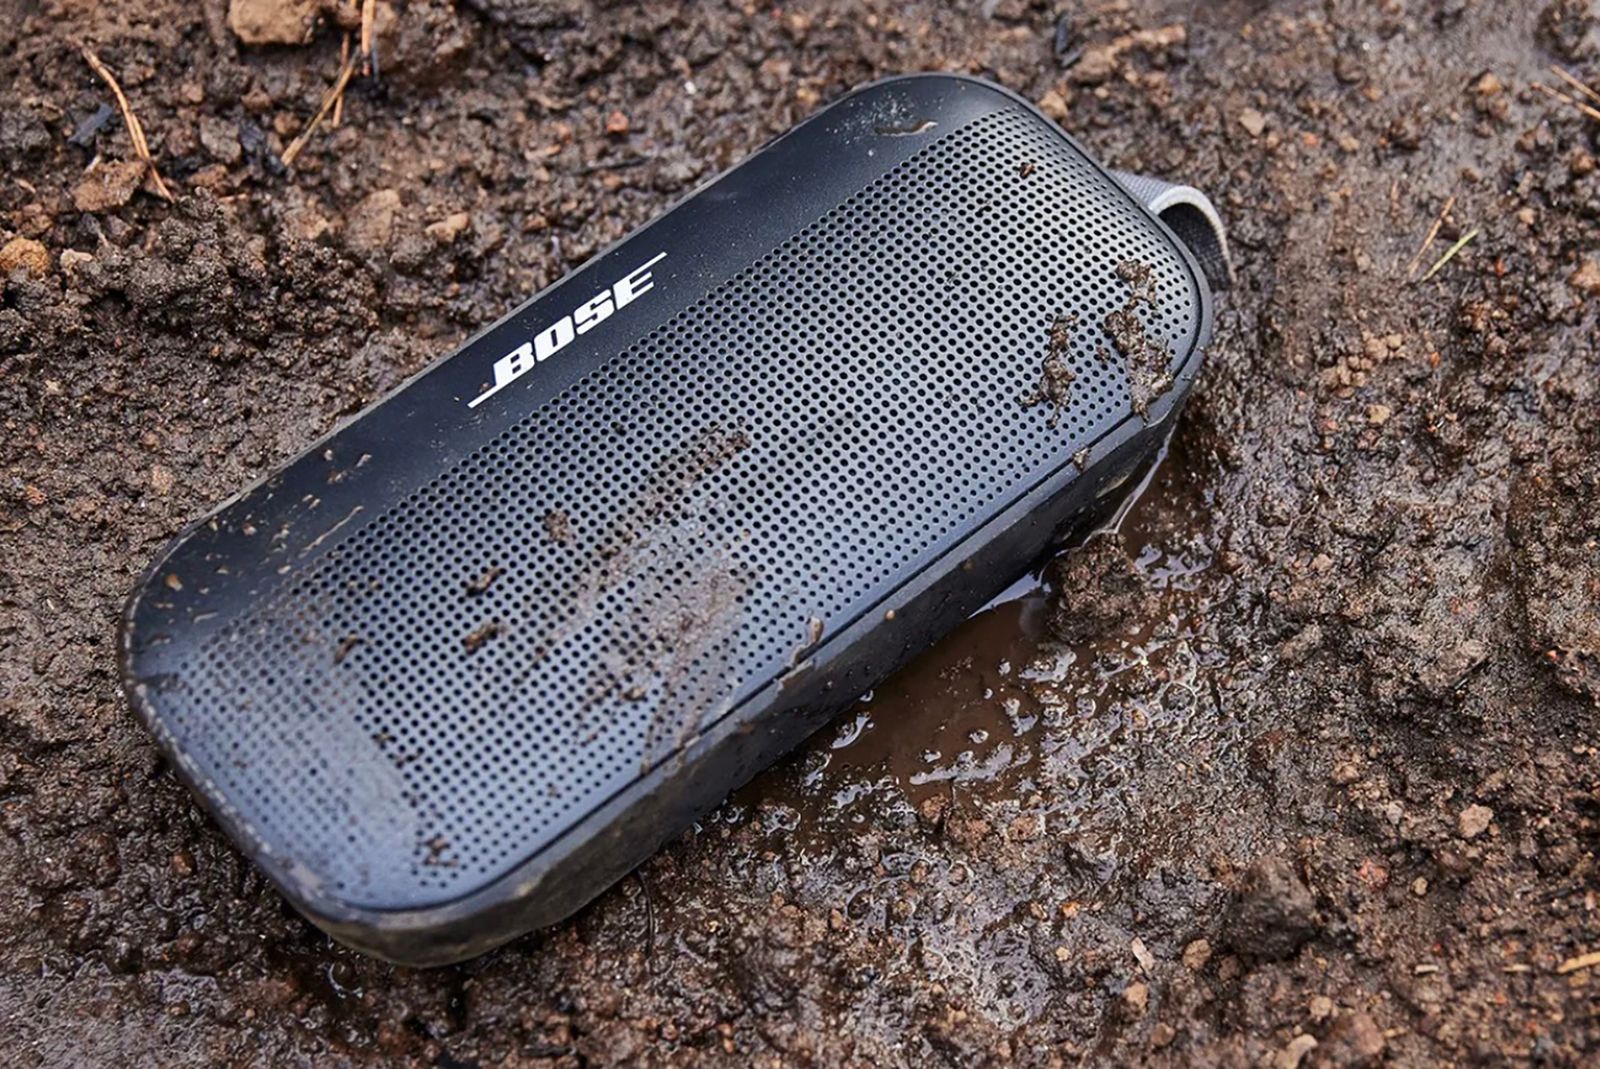 Bose's latest Bluetooth speaker is the rugged SoundLink Flex for $150 photo 2